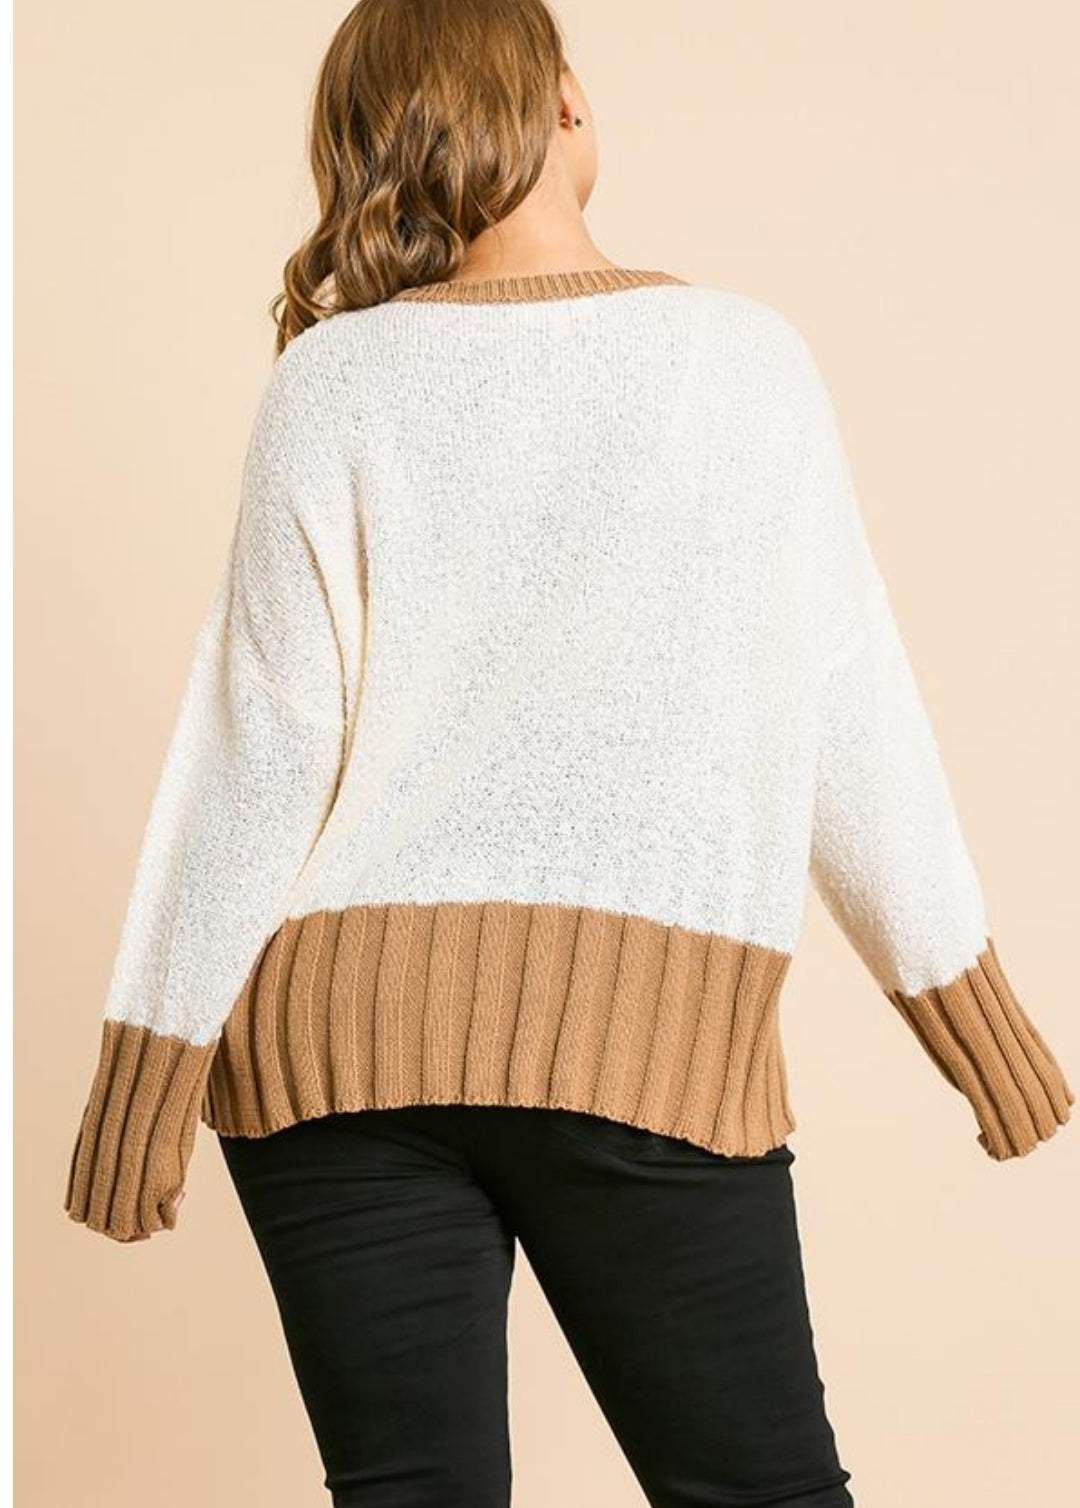 Curvy Style Soft Knit Pullover Sweater!